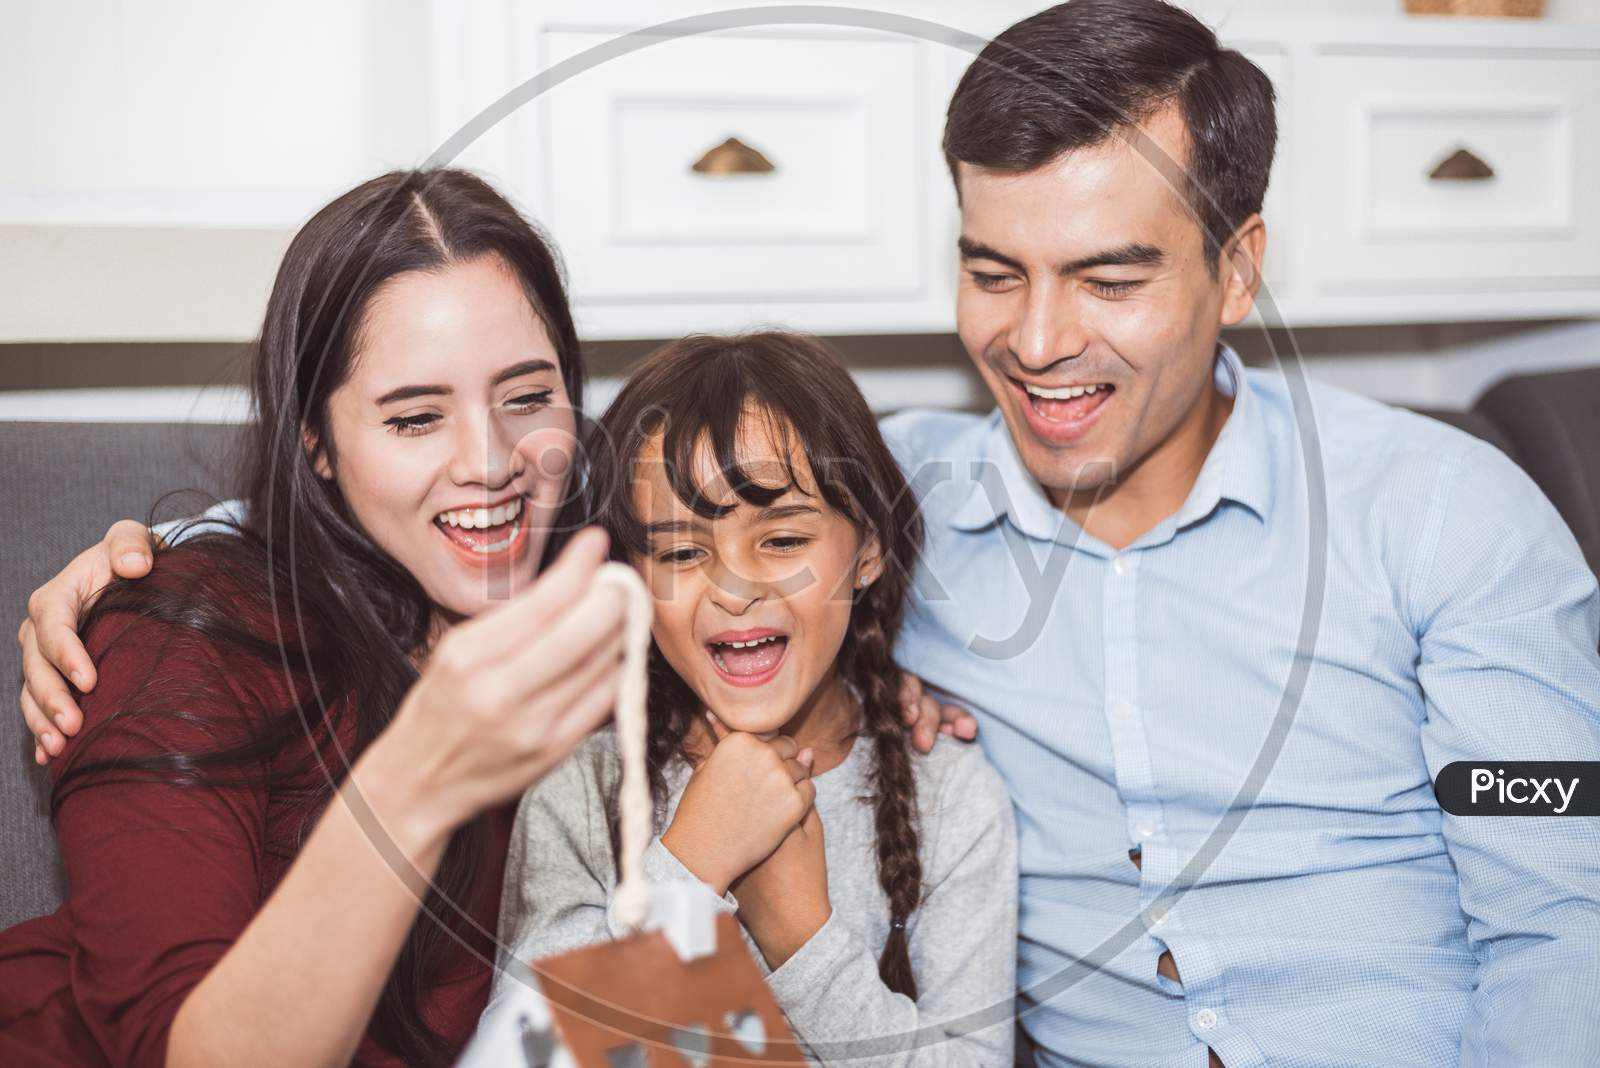 Father And Mother Surprise Their Daughter By Gift Or New Toy. Parents And Children Are Happy Together In Home On Sofa In Living Room. Family And Happiness Of Life Concept.